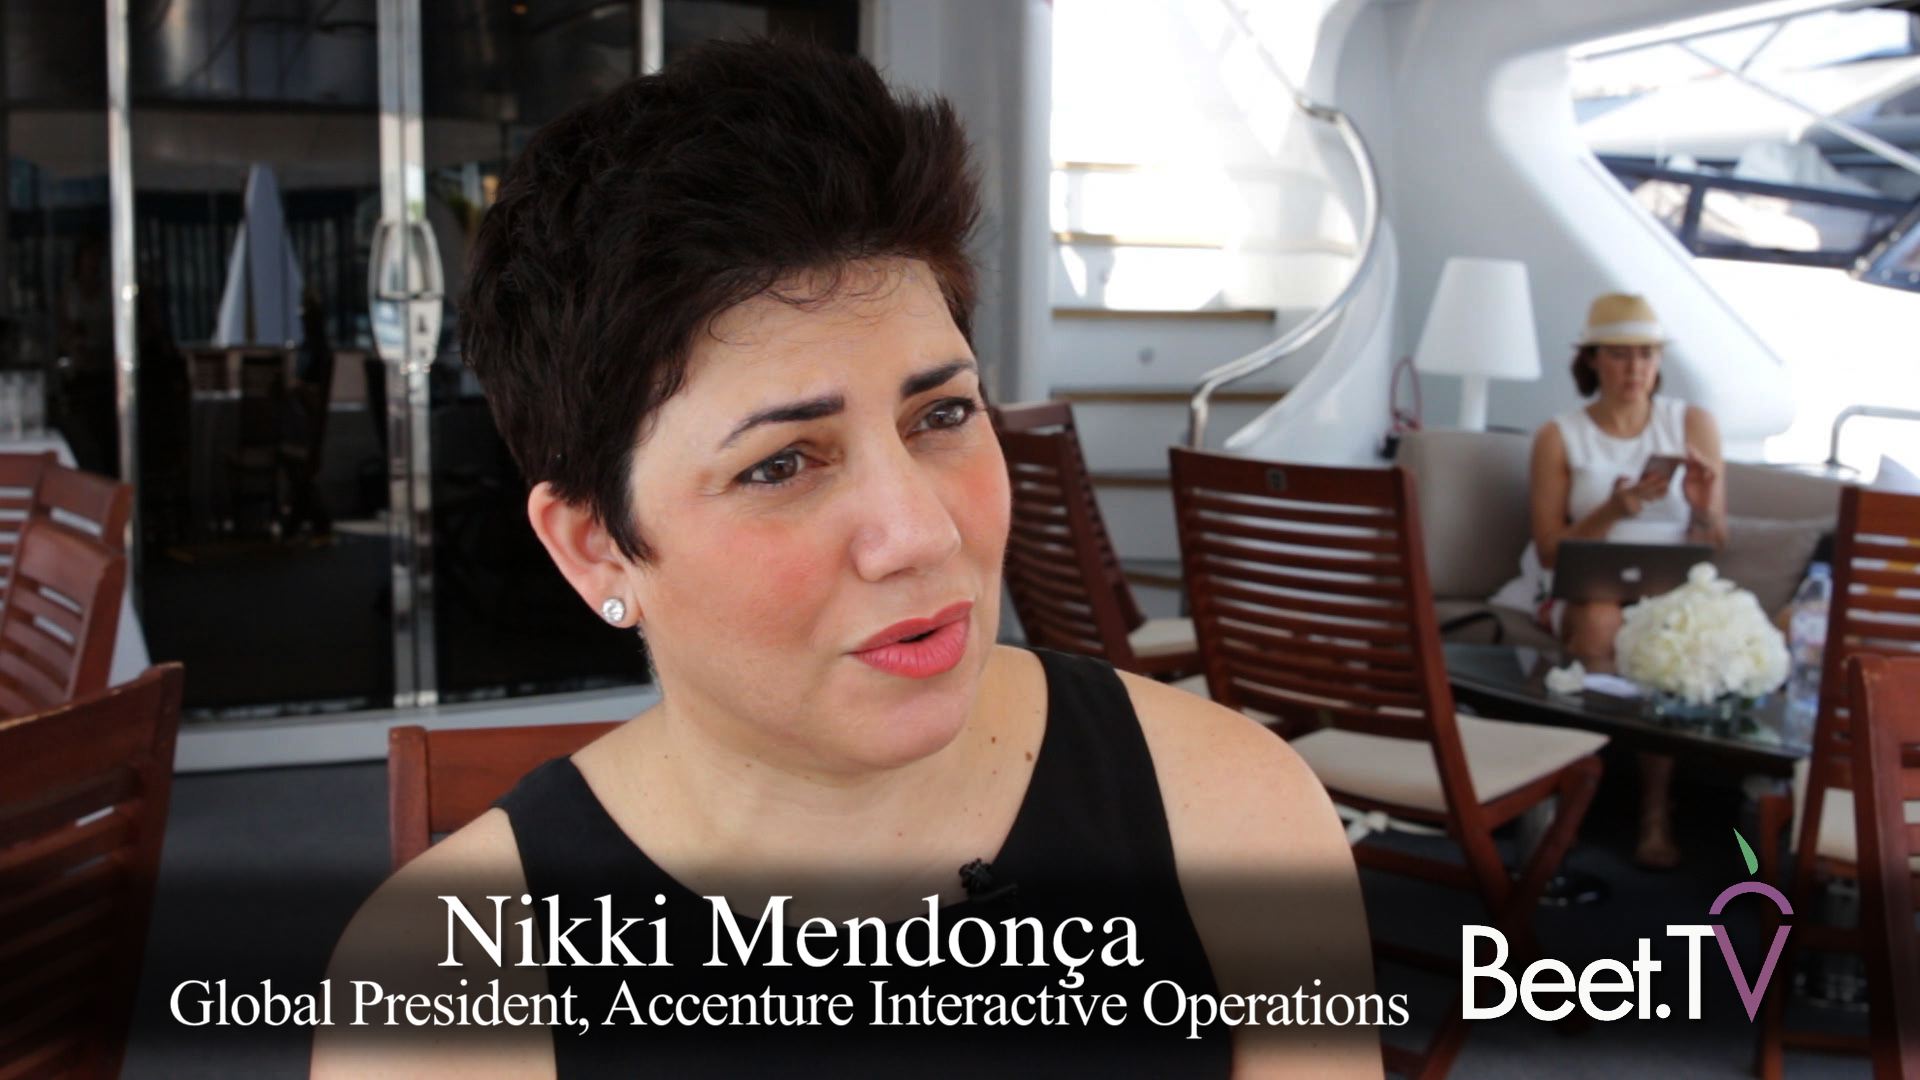 New To Accenture, Mendonca Outlines Firm’s Role In Programmatic, Data-Directed Marketing